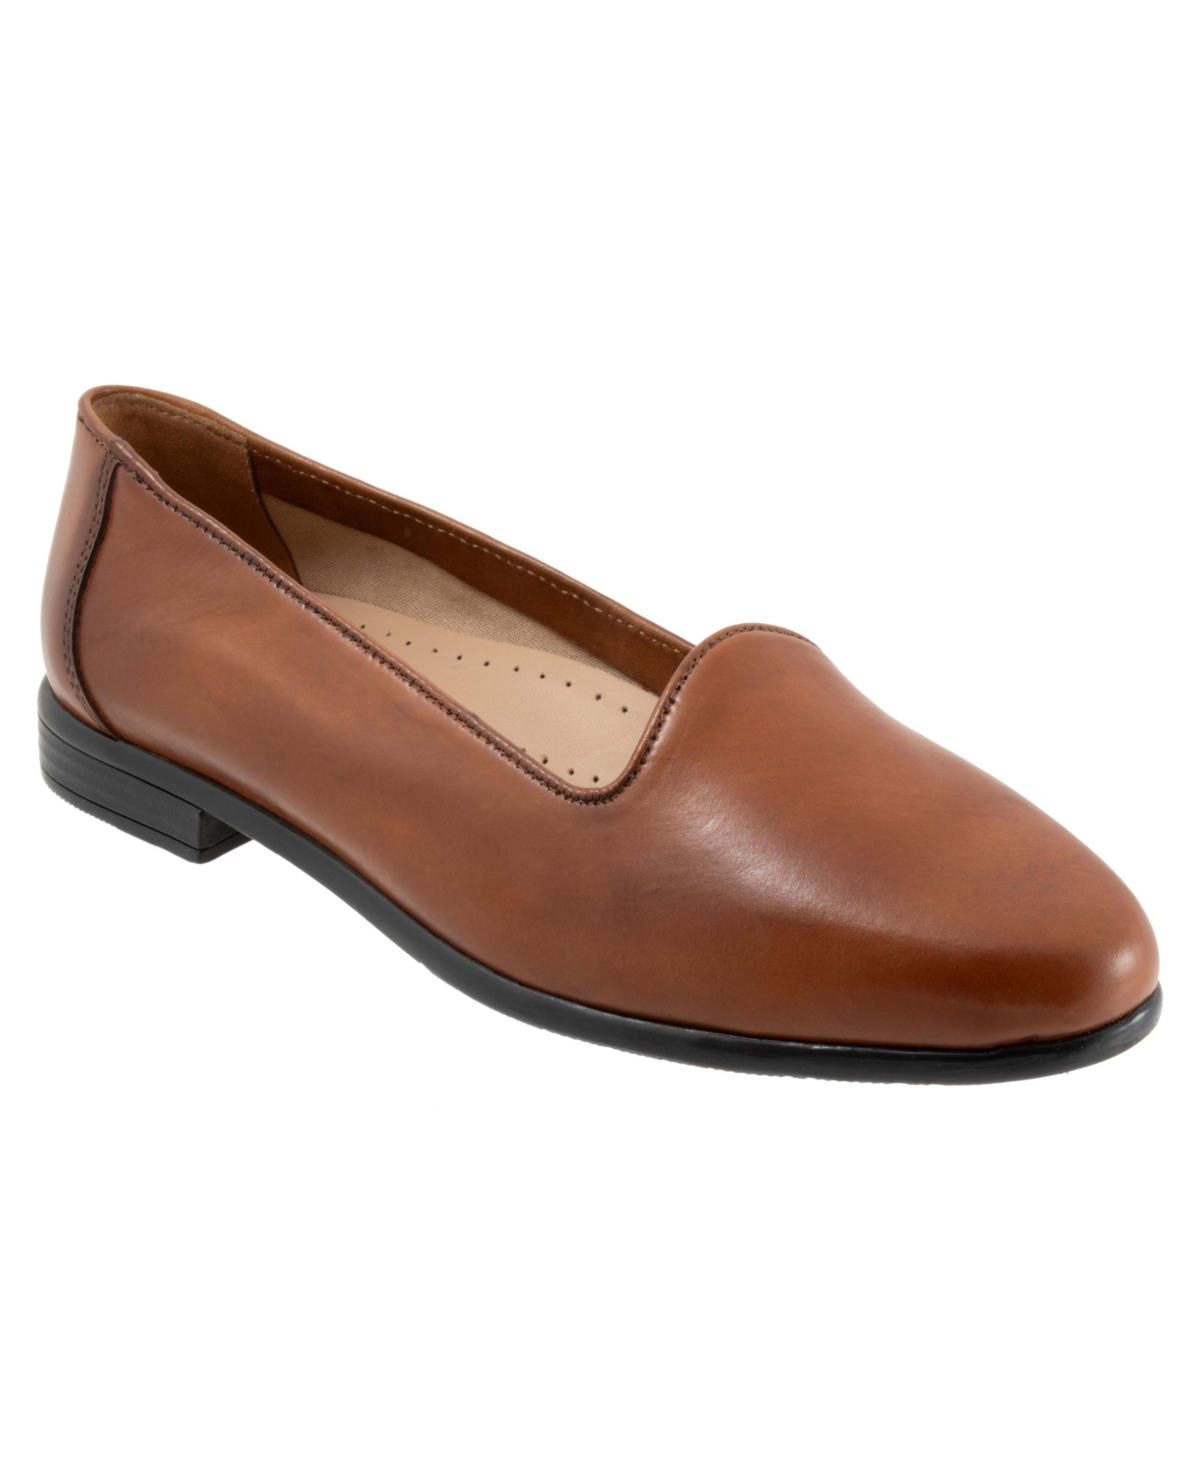 Liz Lux Flats - Taupe